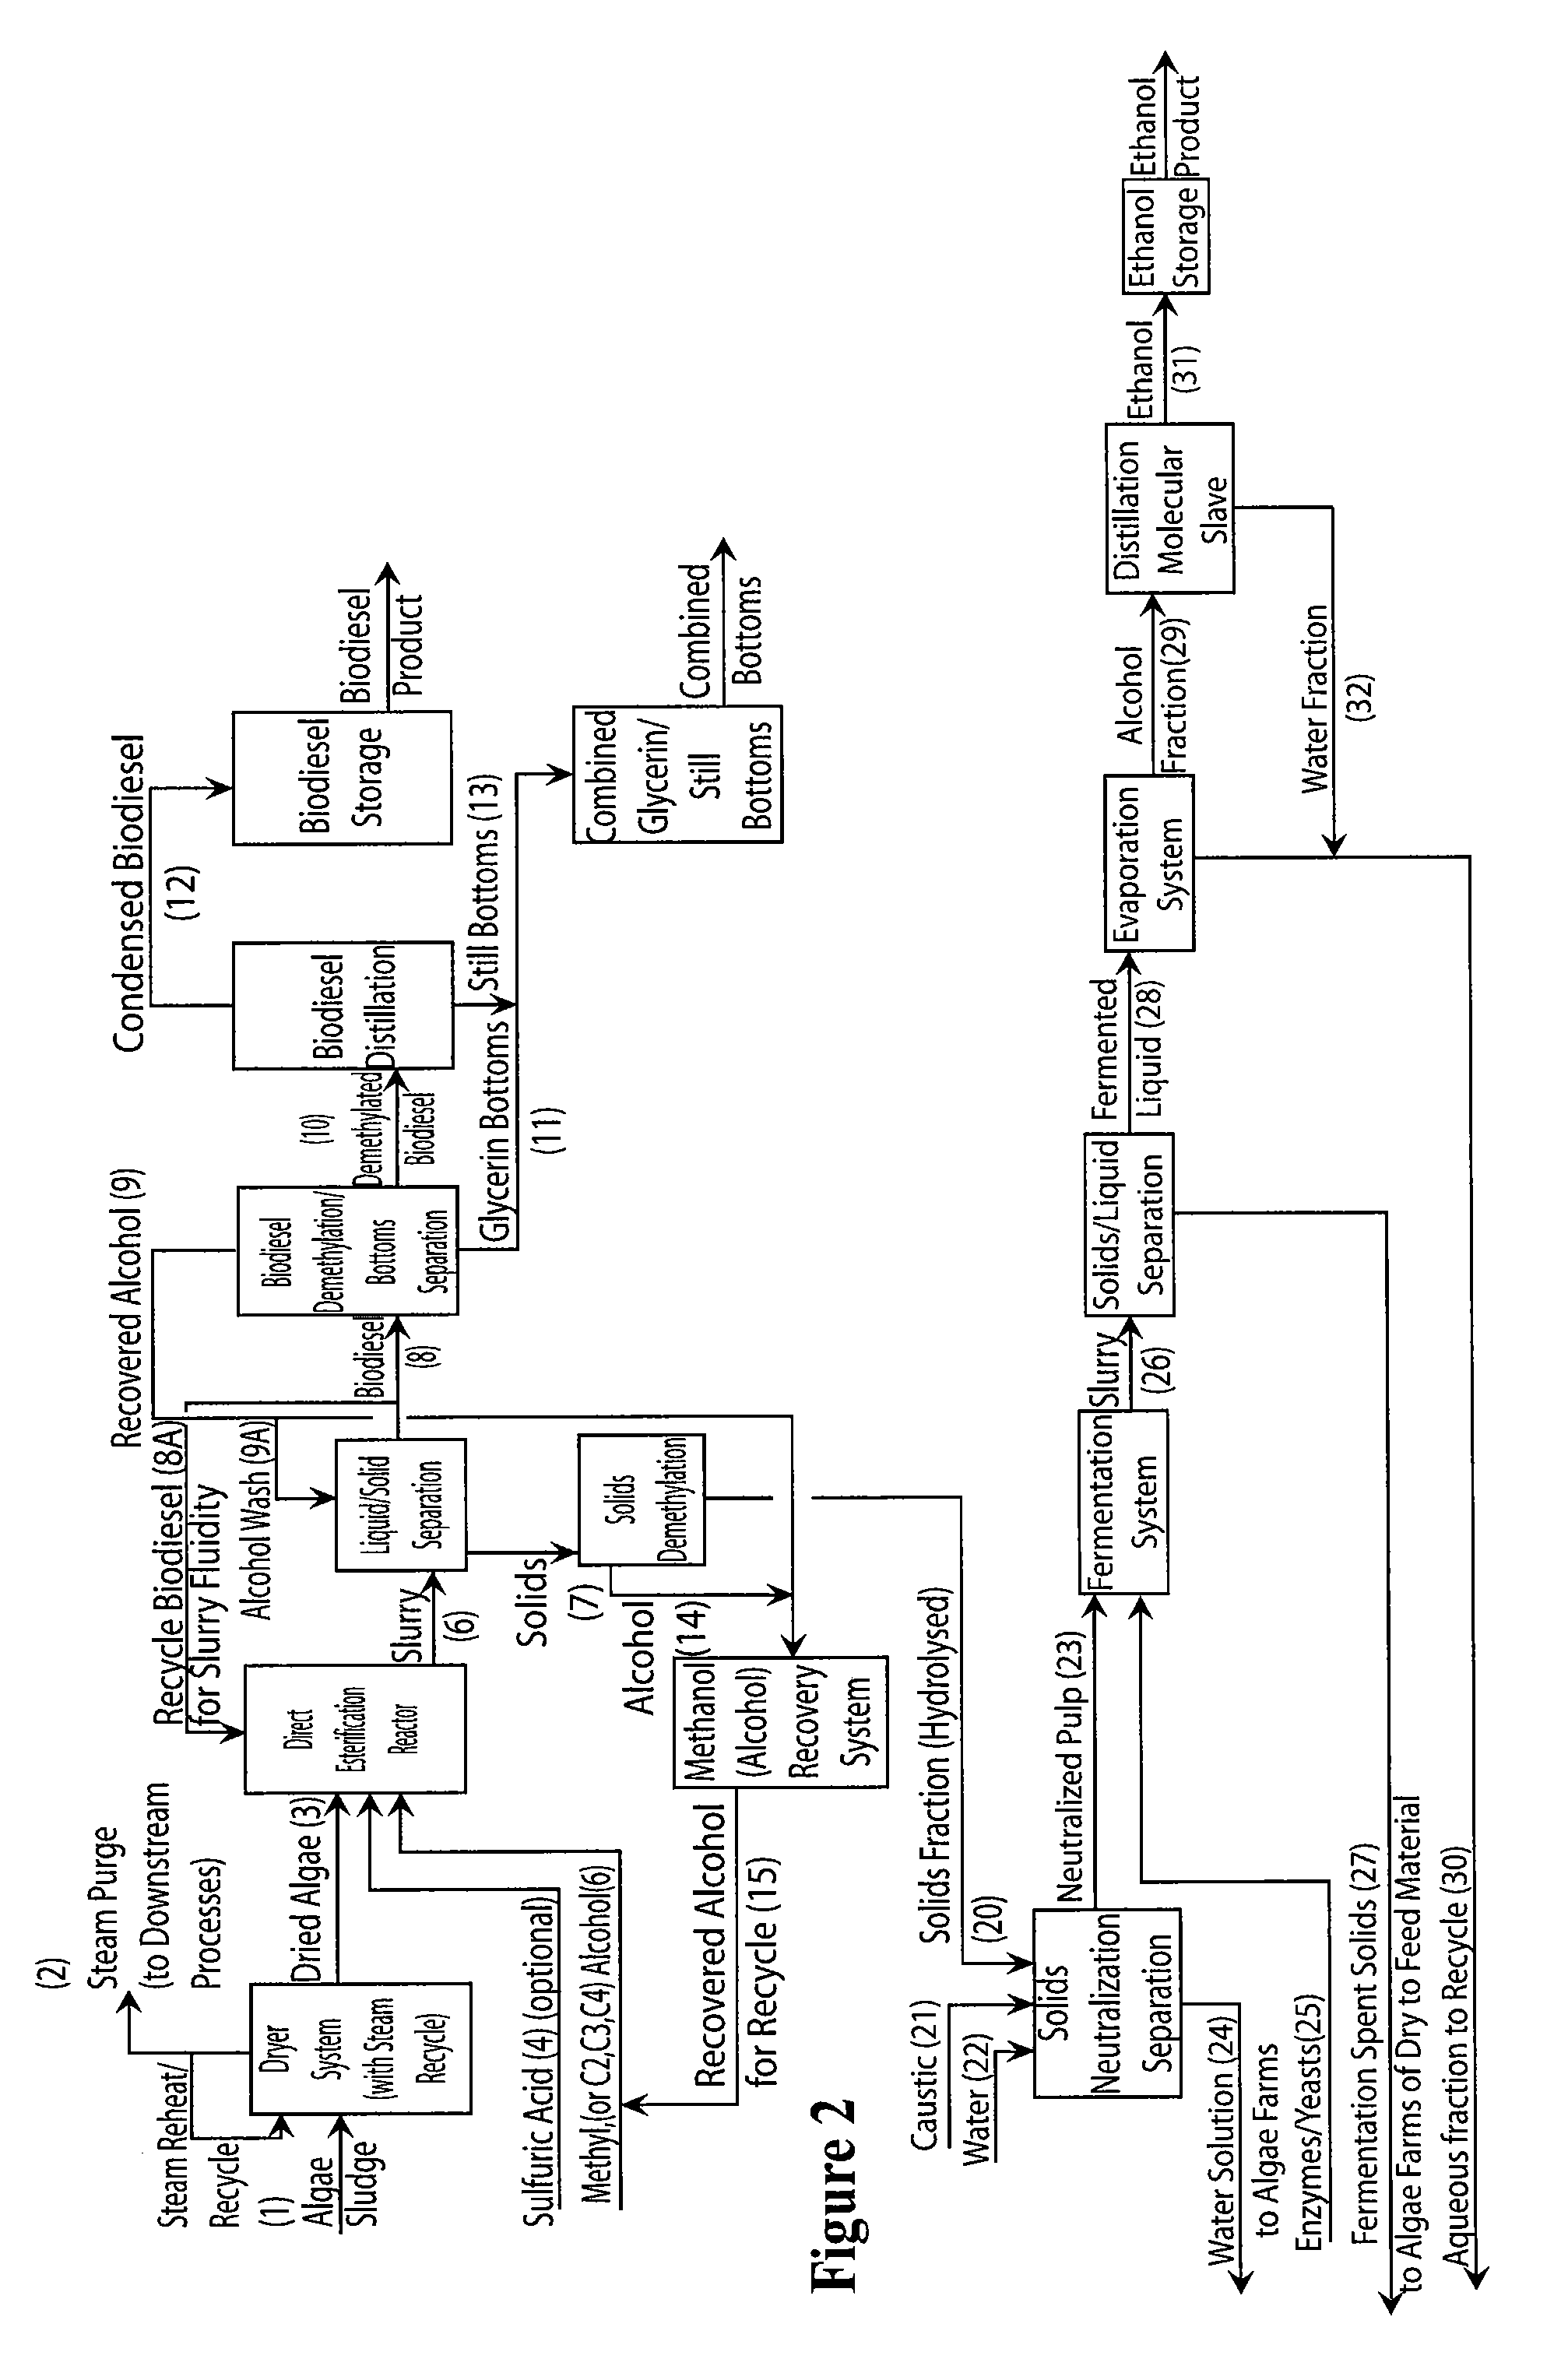 Production of biodiesel, cellulosic sugars, and peptides from the simultaneous esterification and alcoholysis/hydrolysis of materials with oil-containing substituents including phospholipids and peptidic content